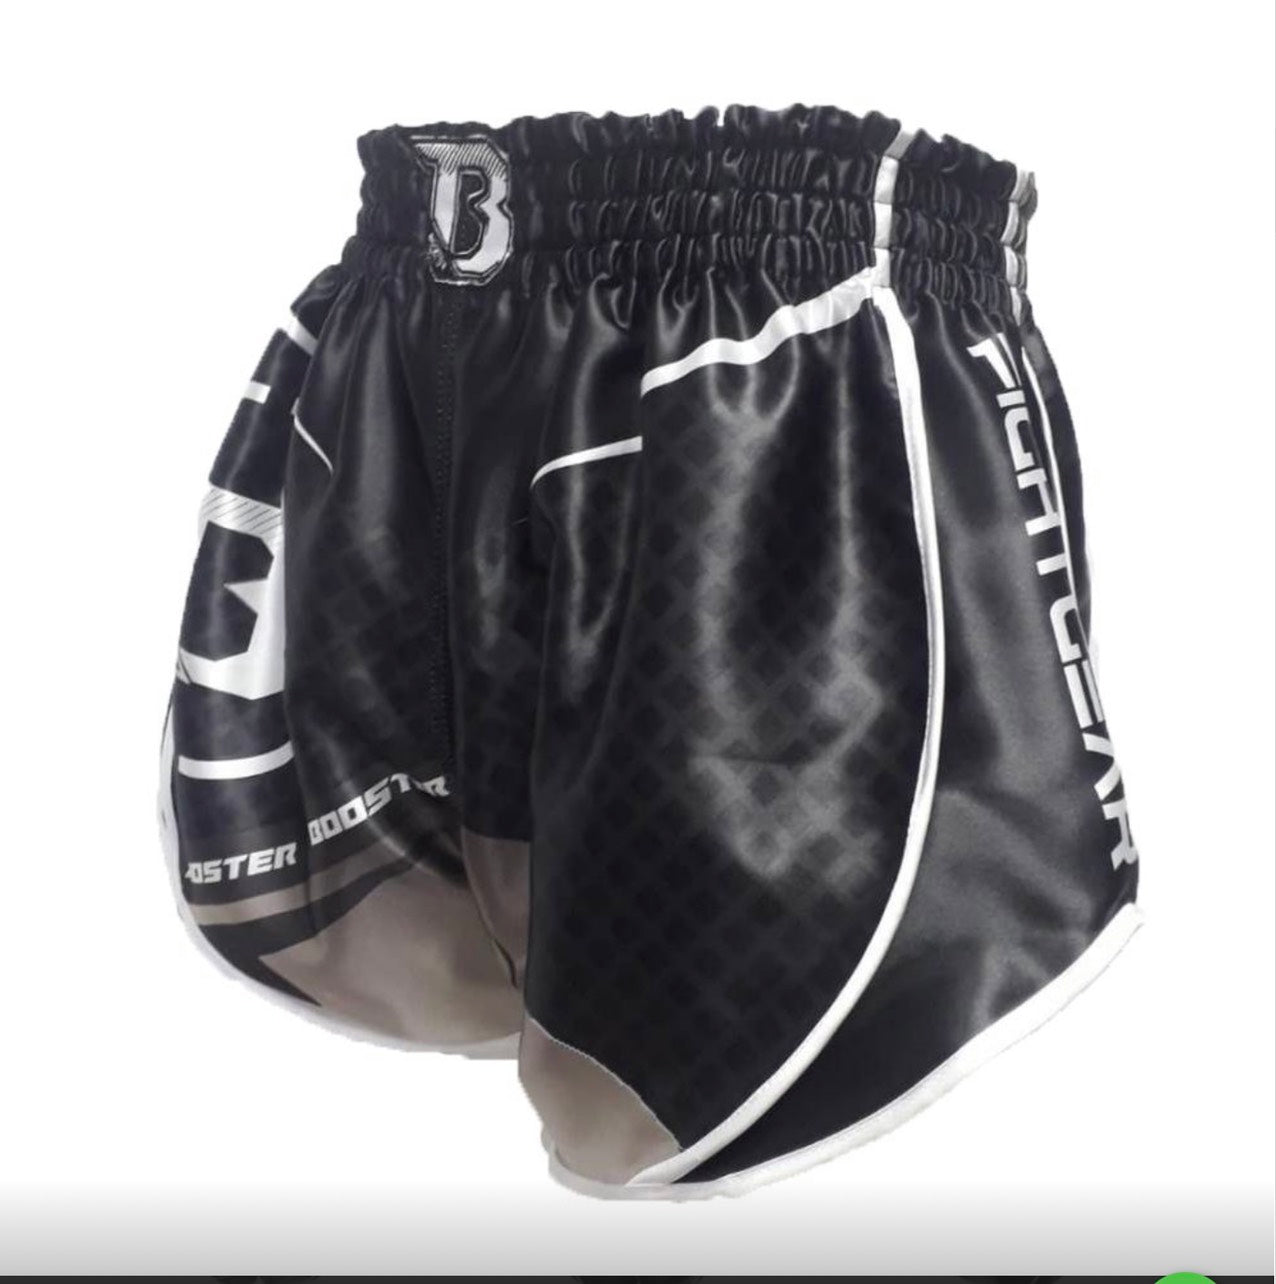 Booster Shorts B Force 2 Black Booster